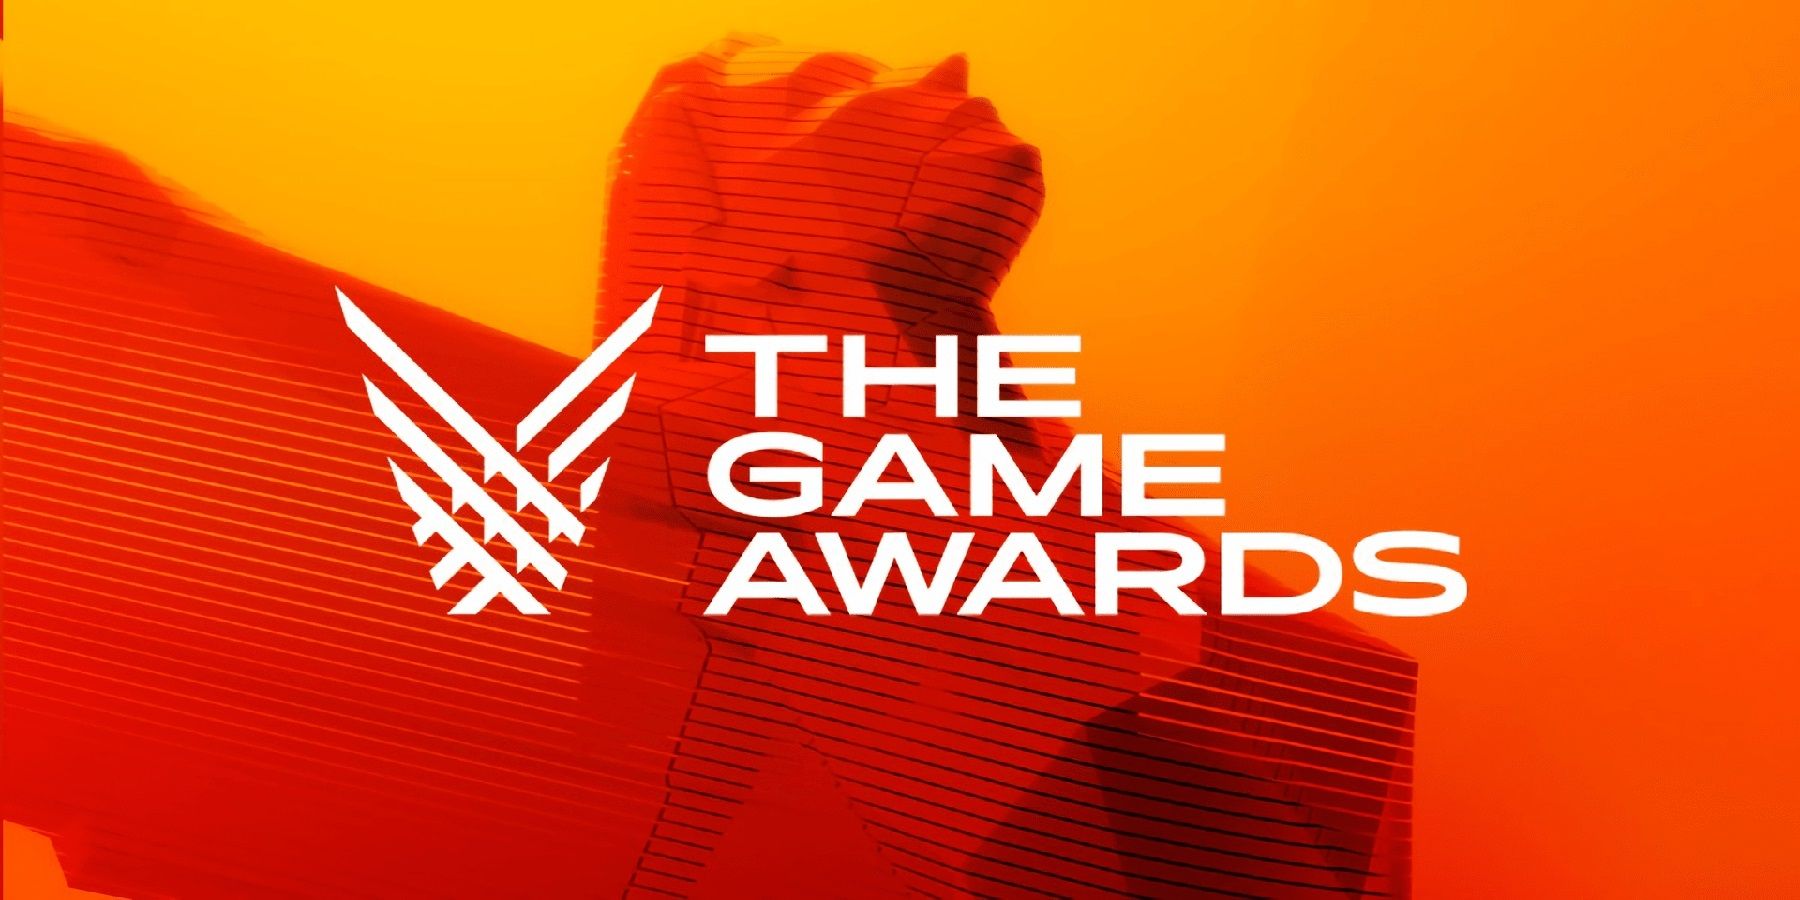 The Game Awards 2019 Nominees Announced With a Packed GOTY List